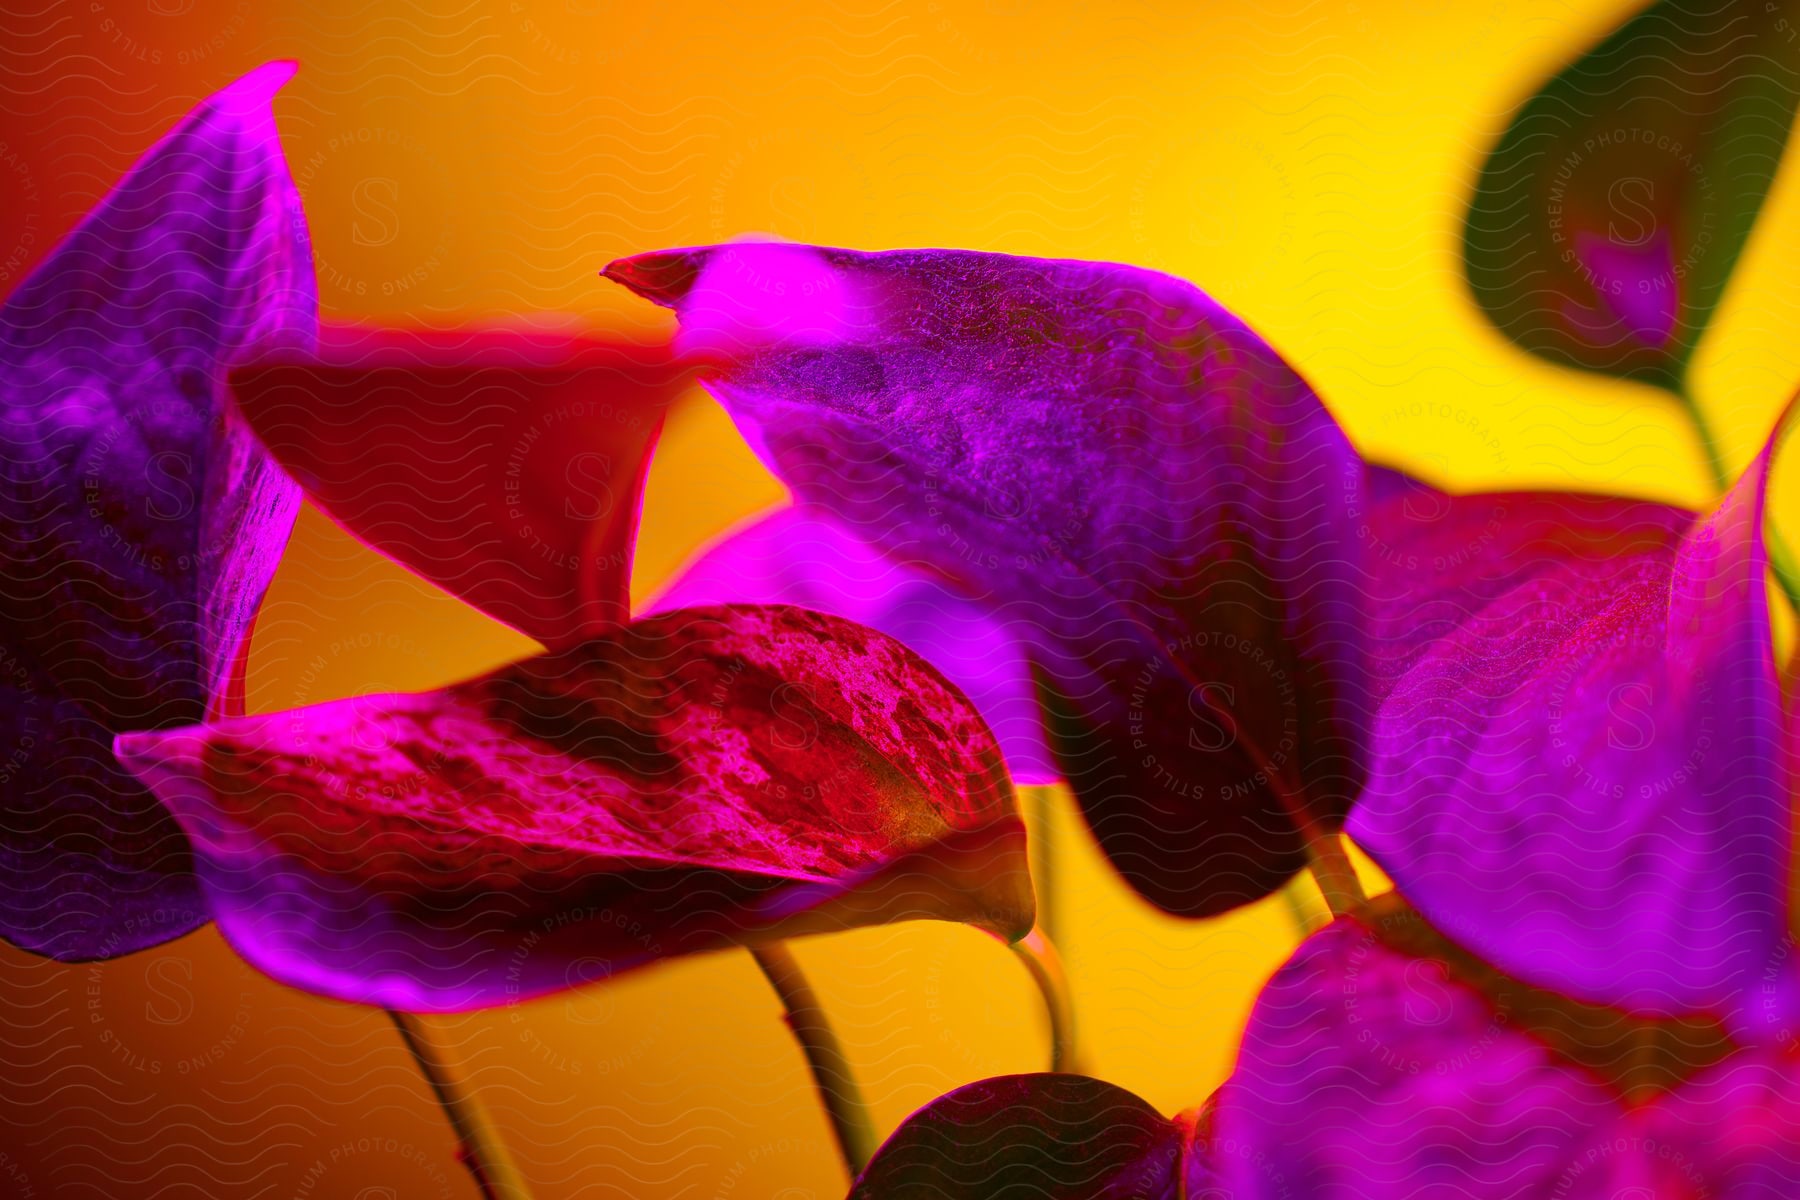 Purpleleaved plant against a yellow wall